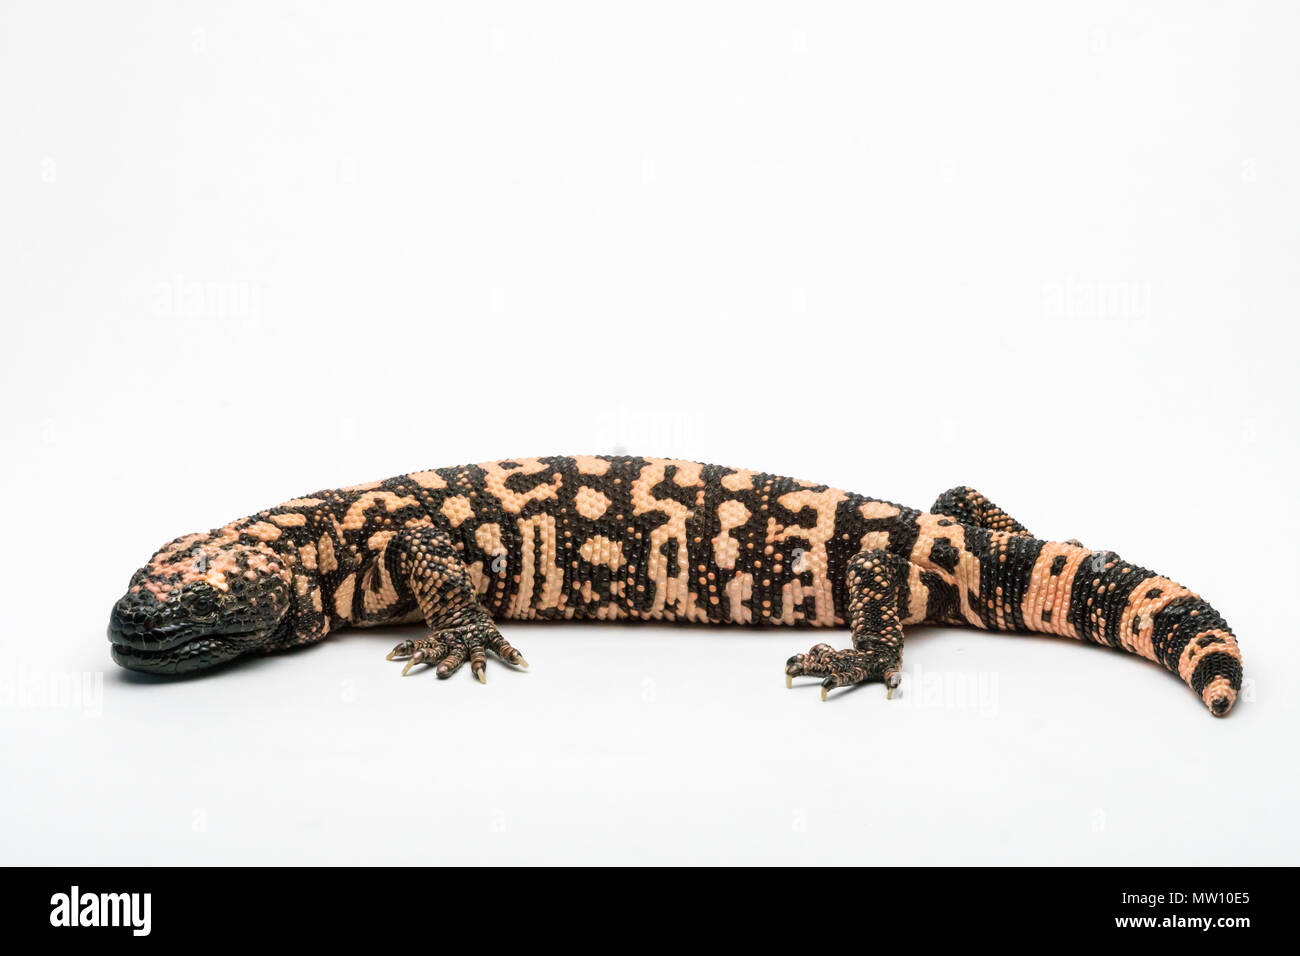 Gila Monster, Isolated on White Background Paper Stock Photo